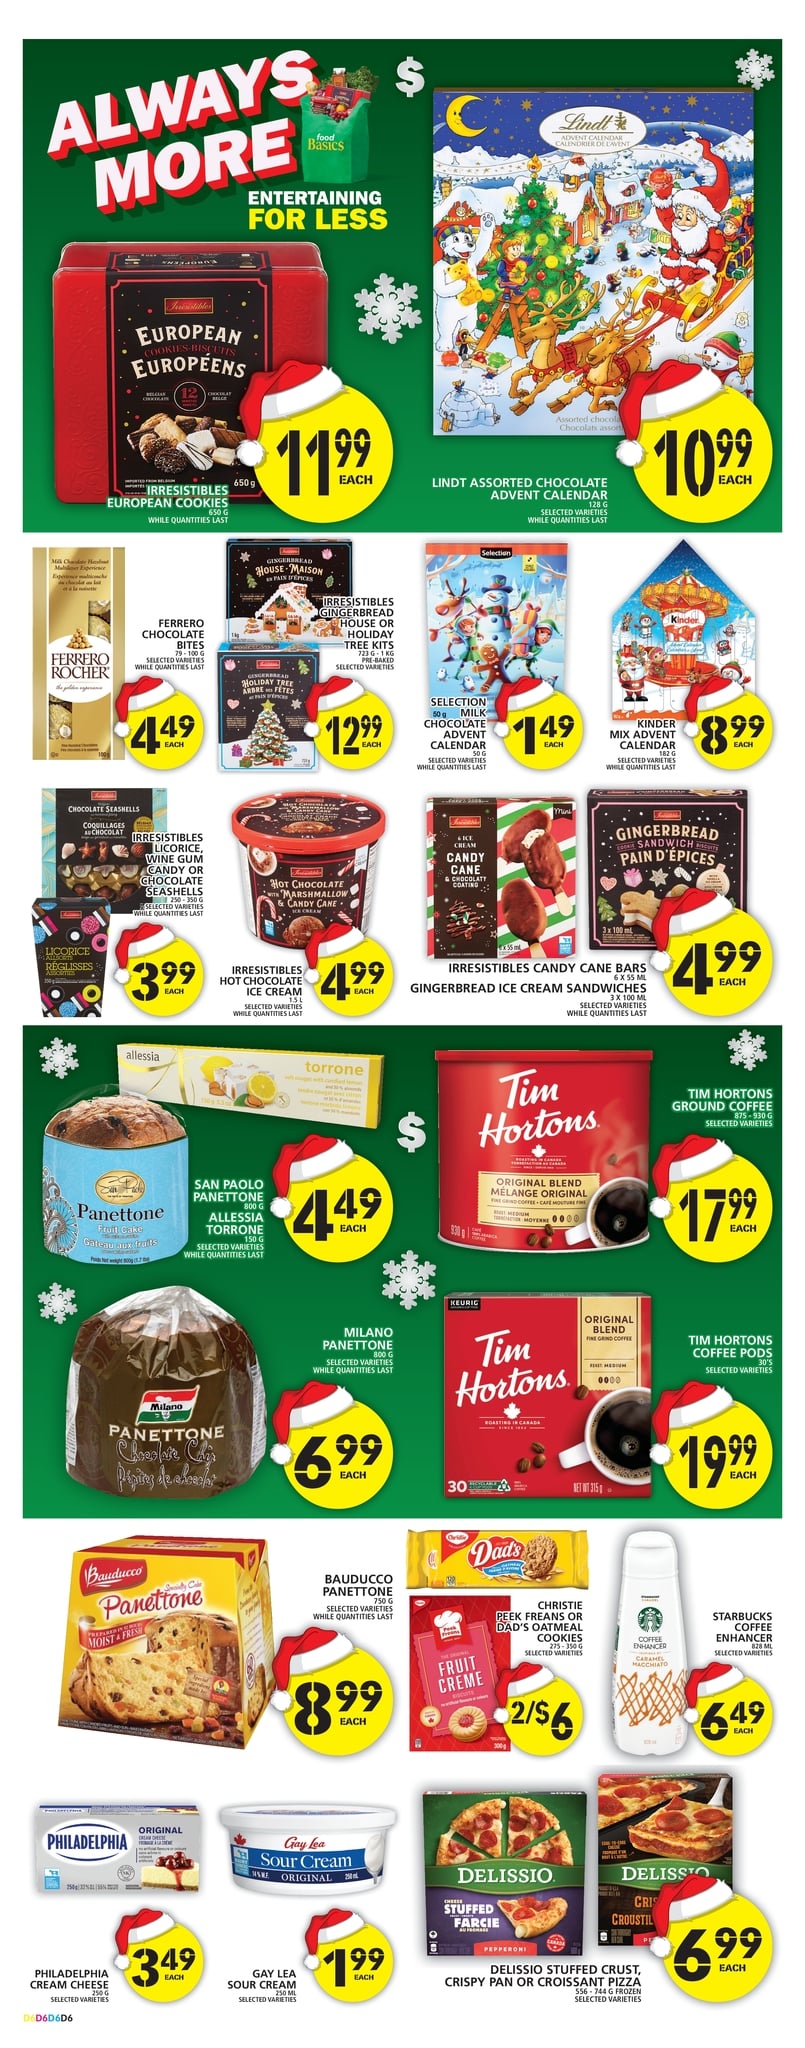 Food Basics - Weekly Flyer Specials - Page 7